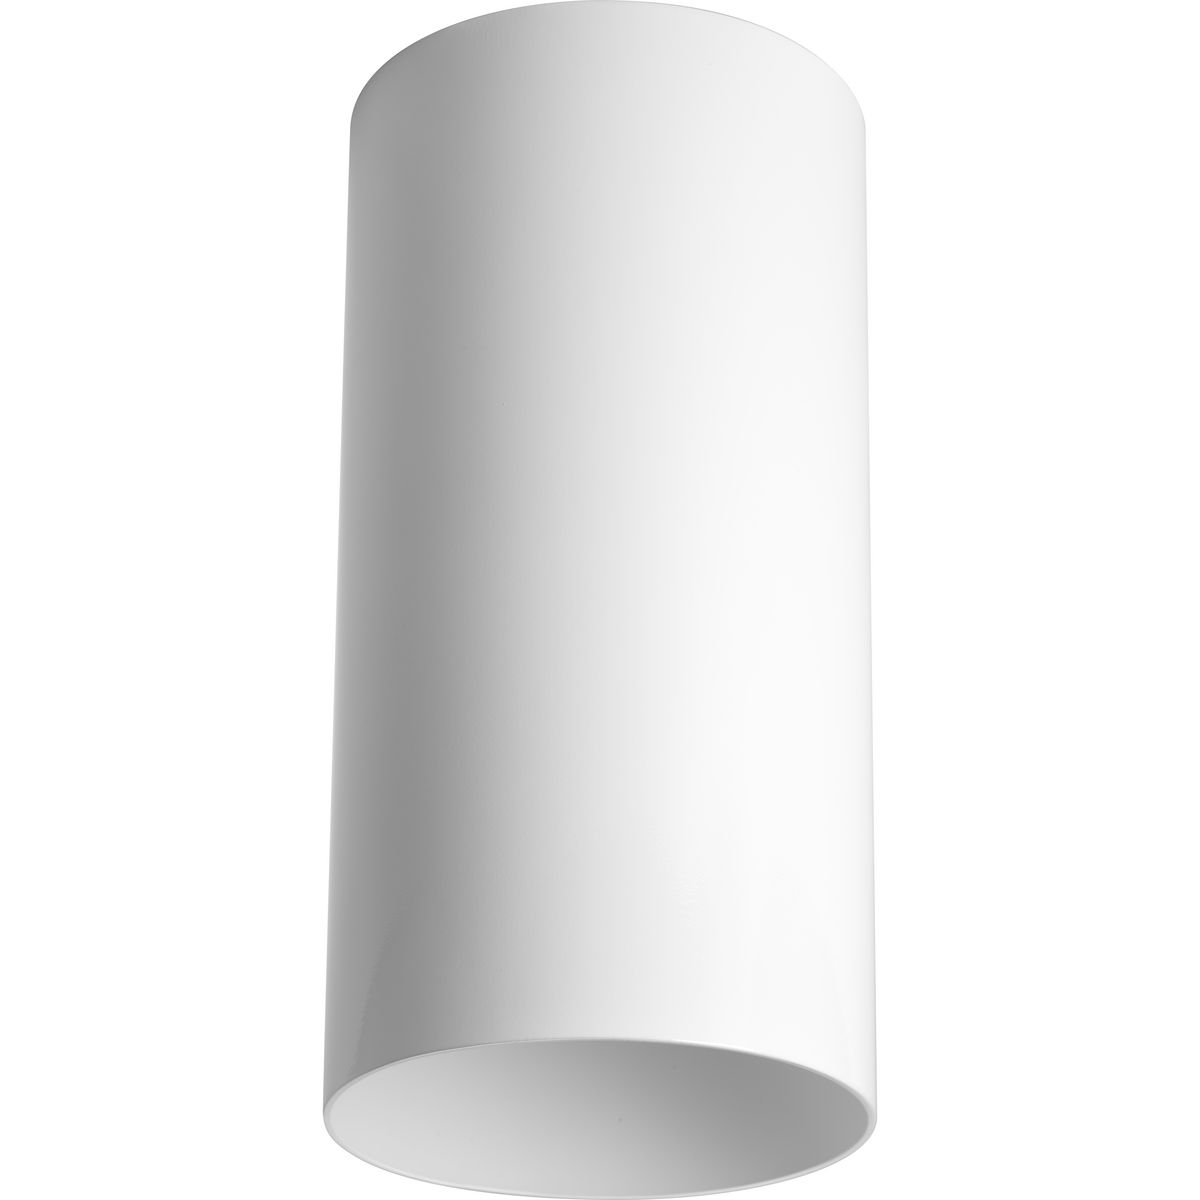 6" Outdoor Ceiling Mount Cylinder - Damp Location Listed - Model P5741-30